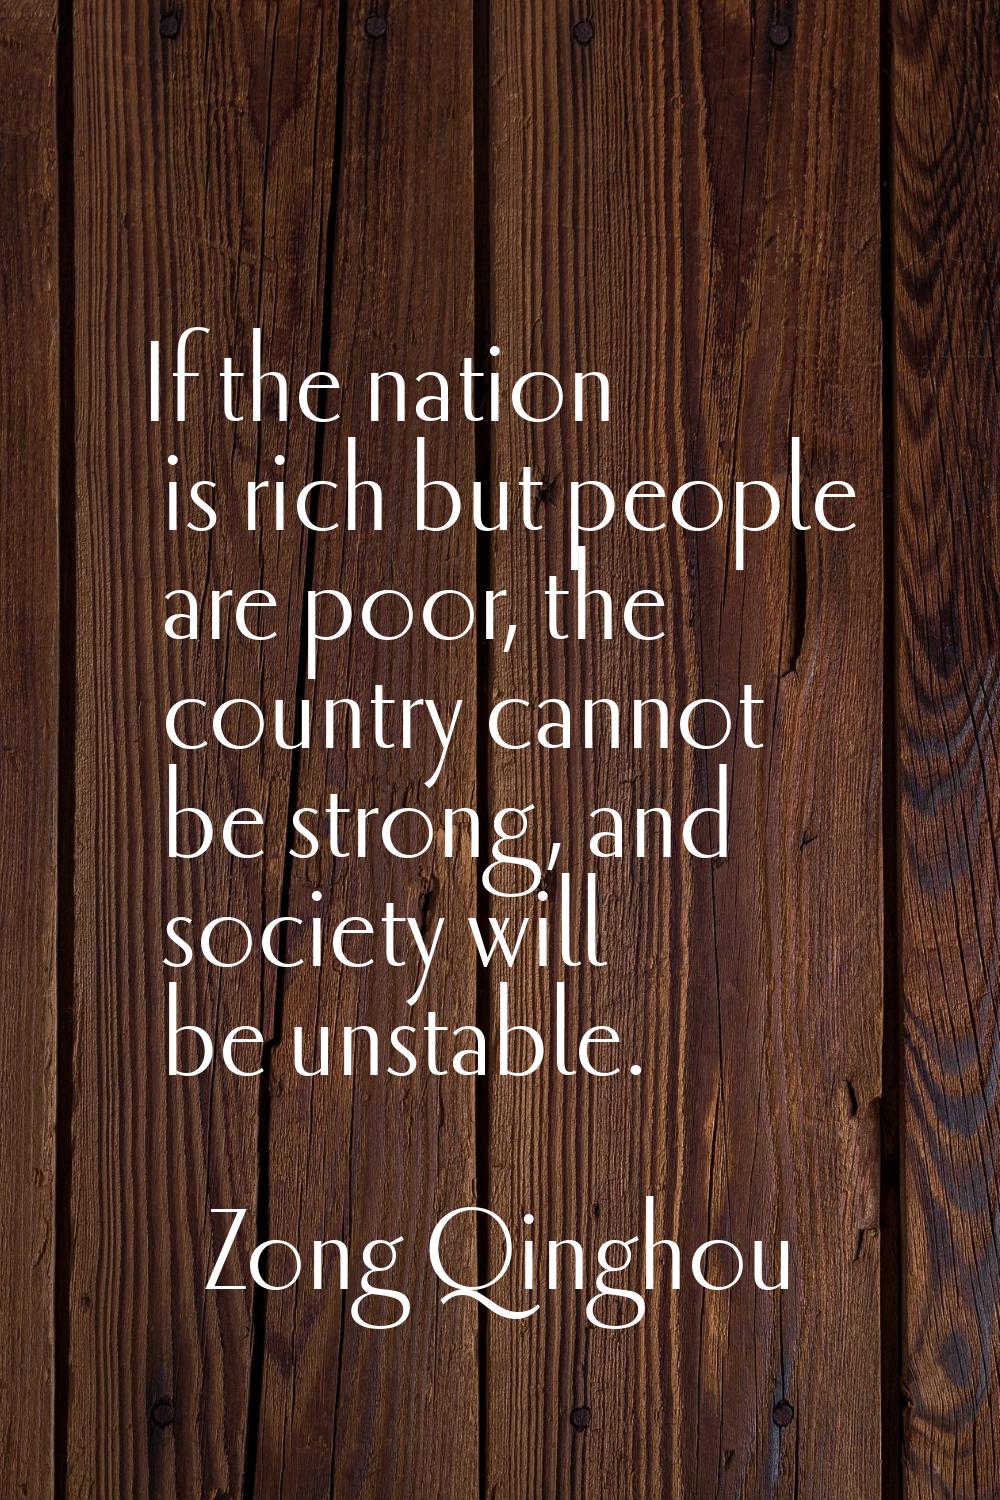 If the nation is rich but people are poor, the country cannot be strong, and society will be unstab